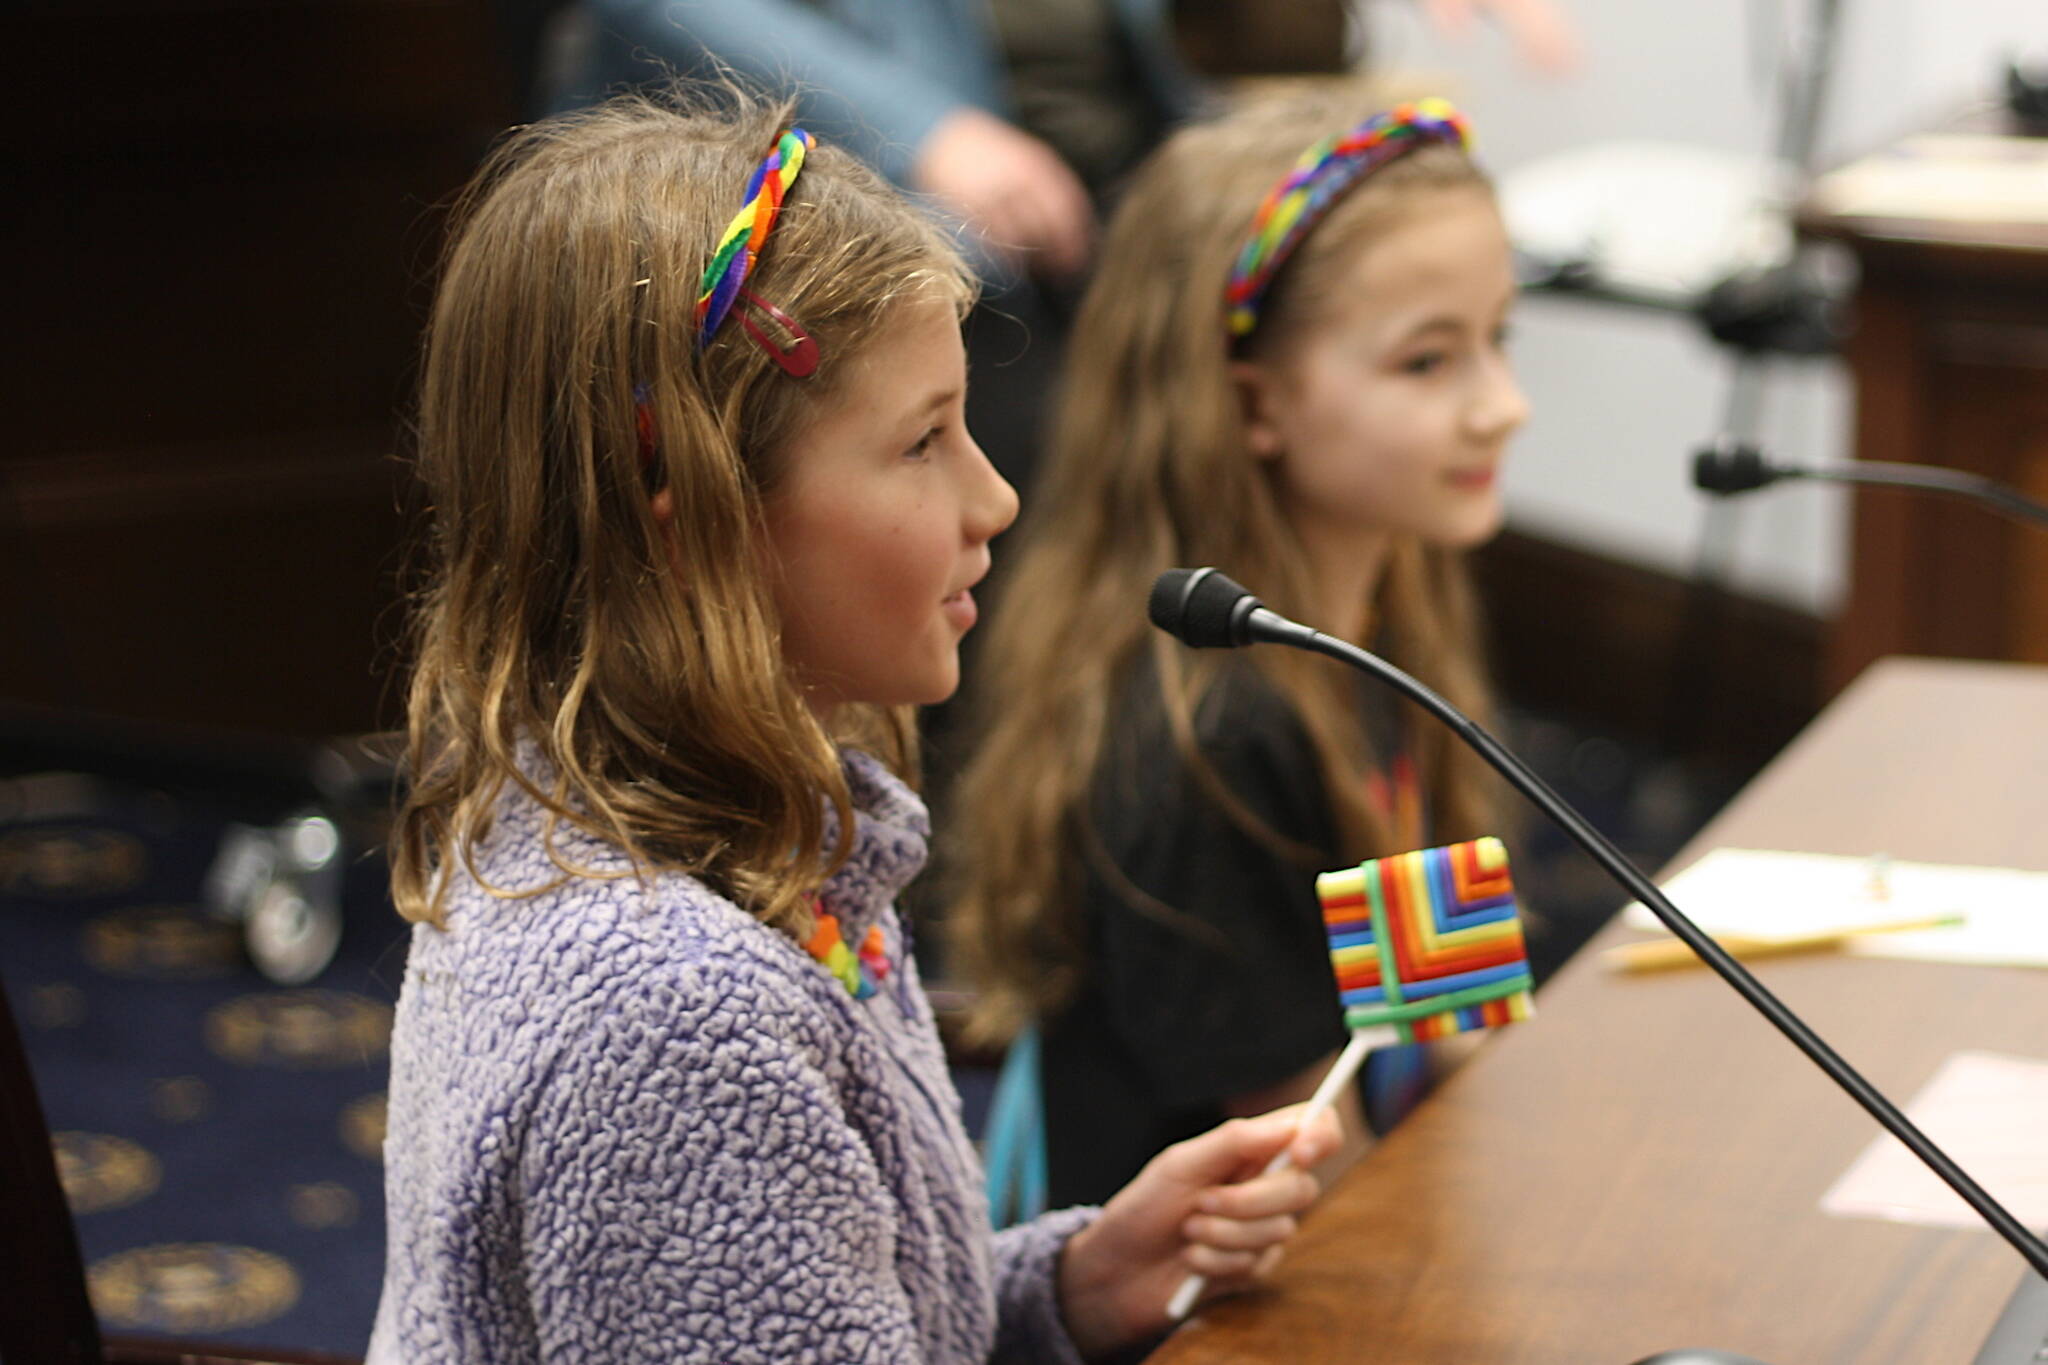 Mark Sabbatini / Juneau Empire 
Nayeli Hood, 10, foreground, and Ona Eckerson, 9, testify against a bill limiting sex and gender content in schools during a House Education Committee meeting Thursday night.